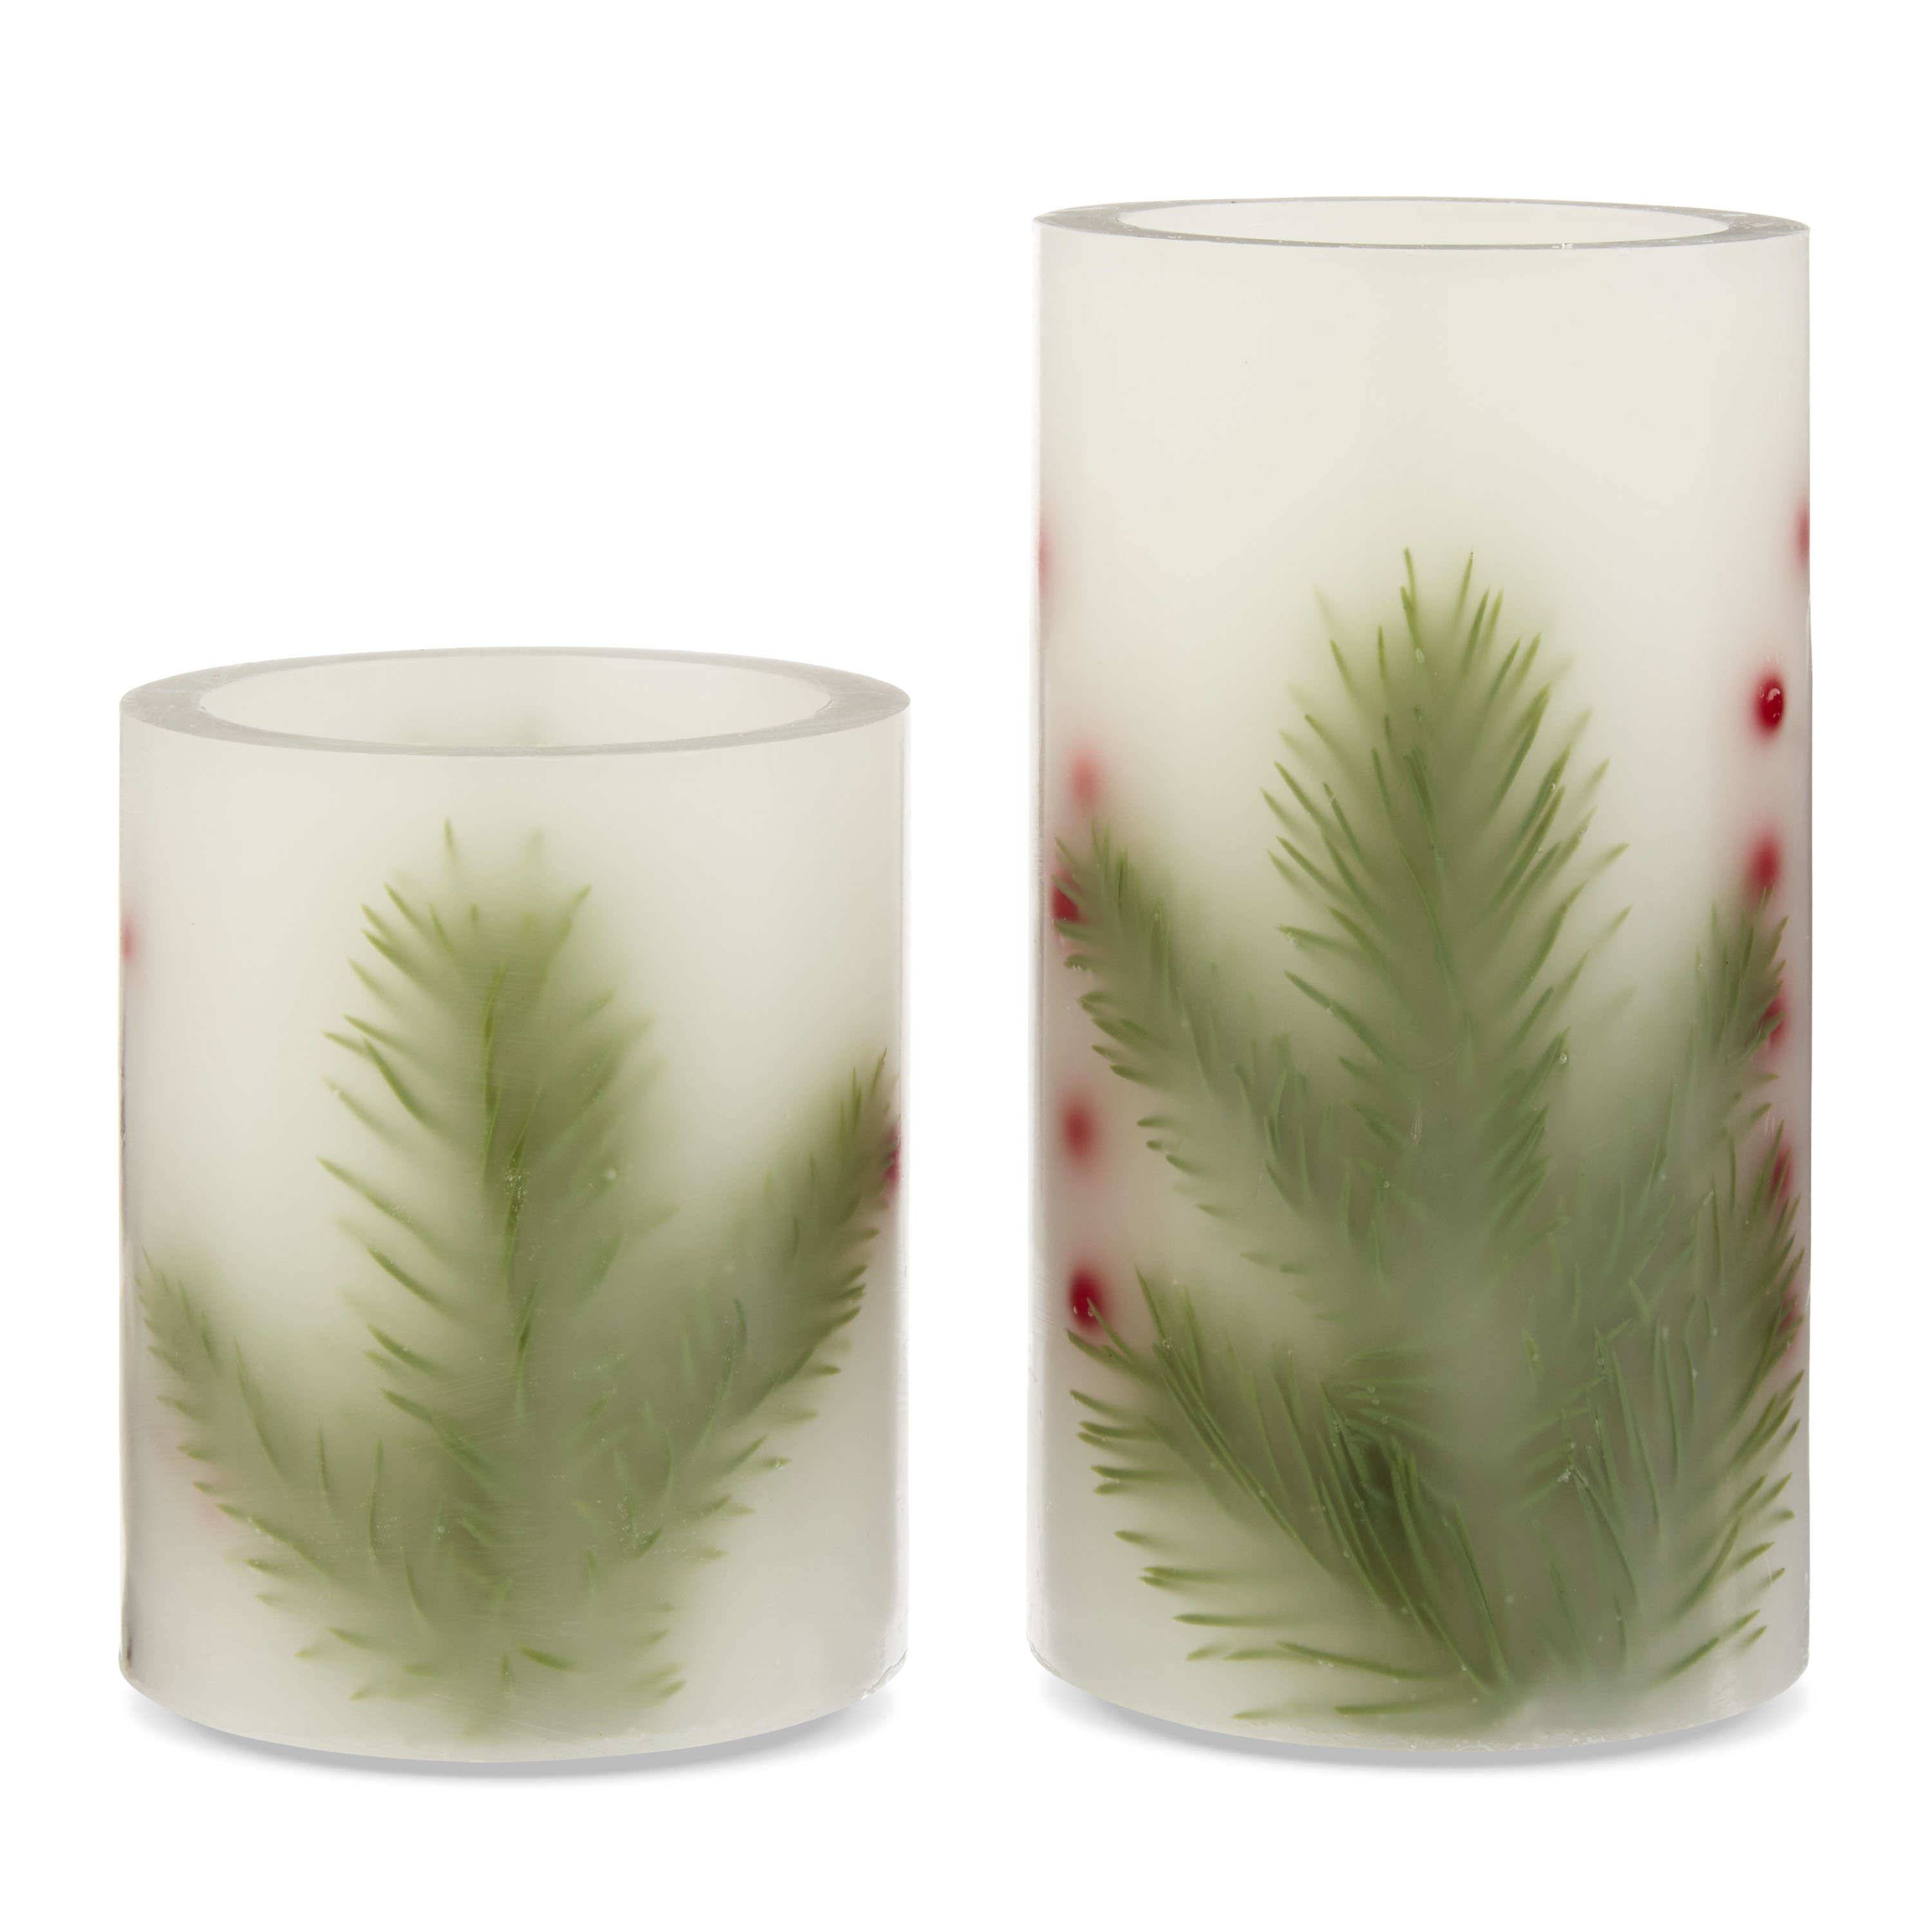 Holiday Time 3.25x4 and 3.25x6 inch Led Flameless Pillar Candles, White Unscented Wax with Red Berry&Evergreen ,Warm White Light,Set Pack - image 4 of 5